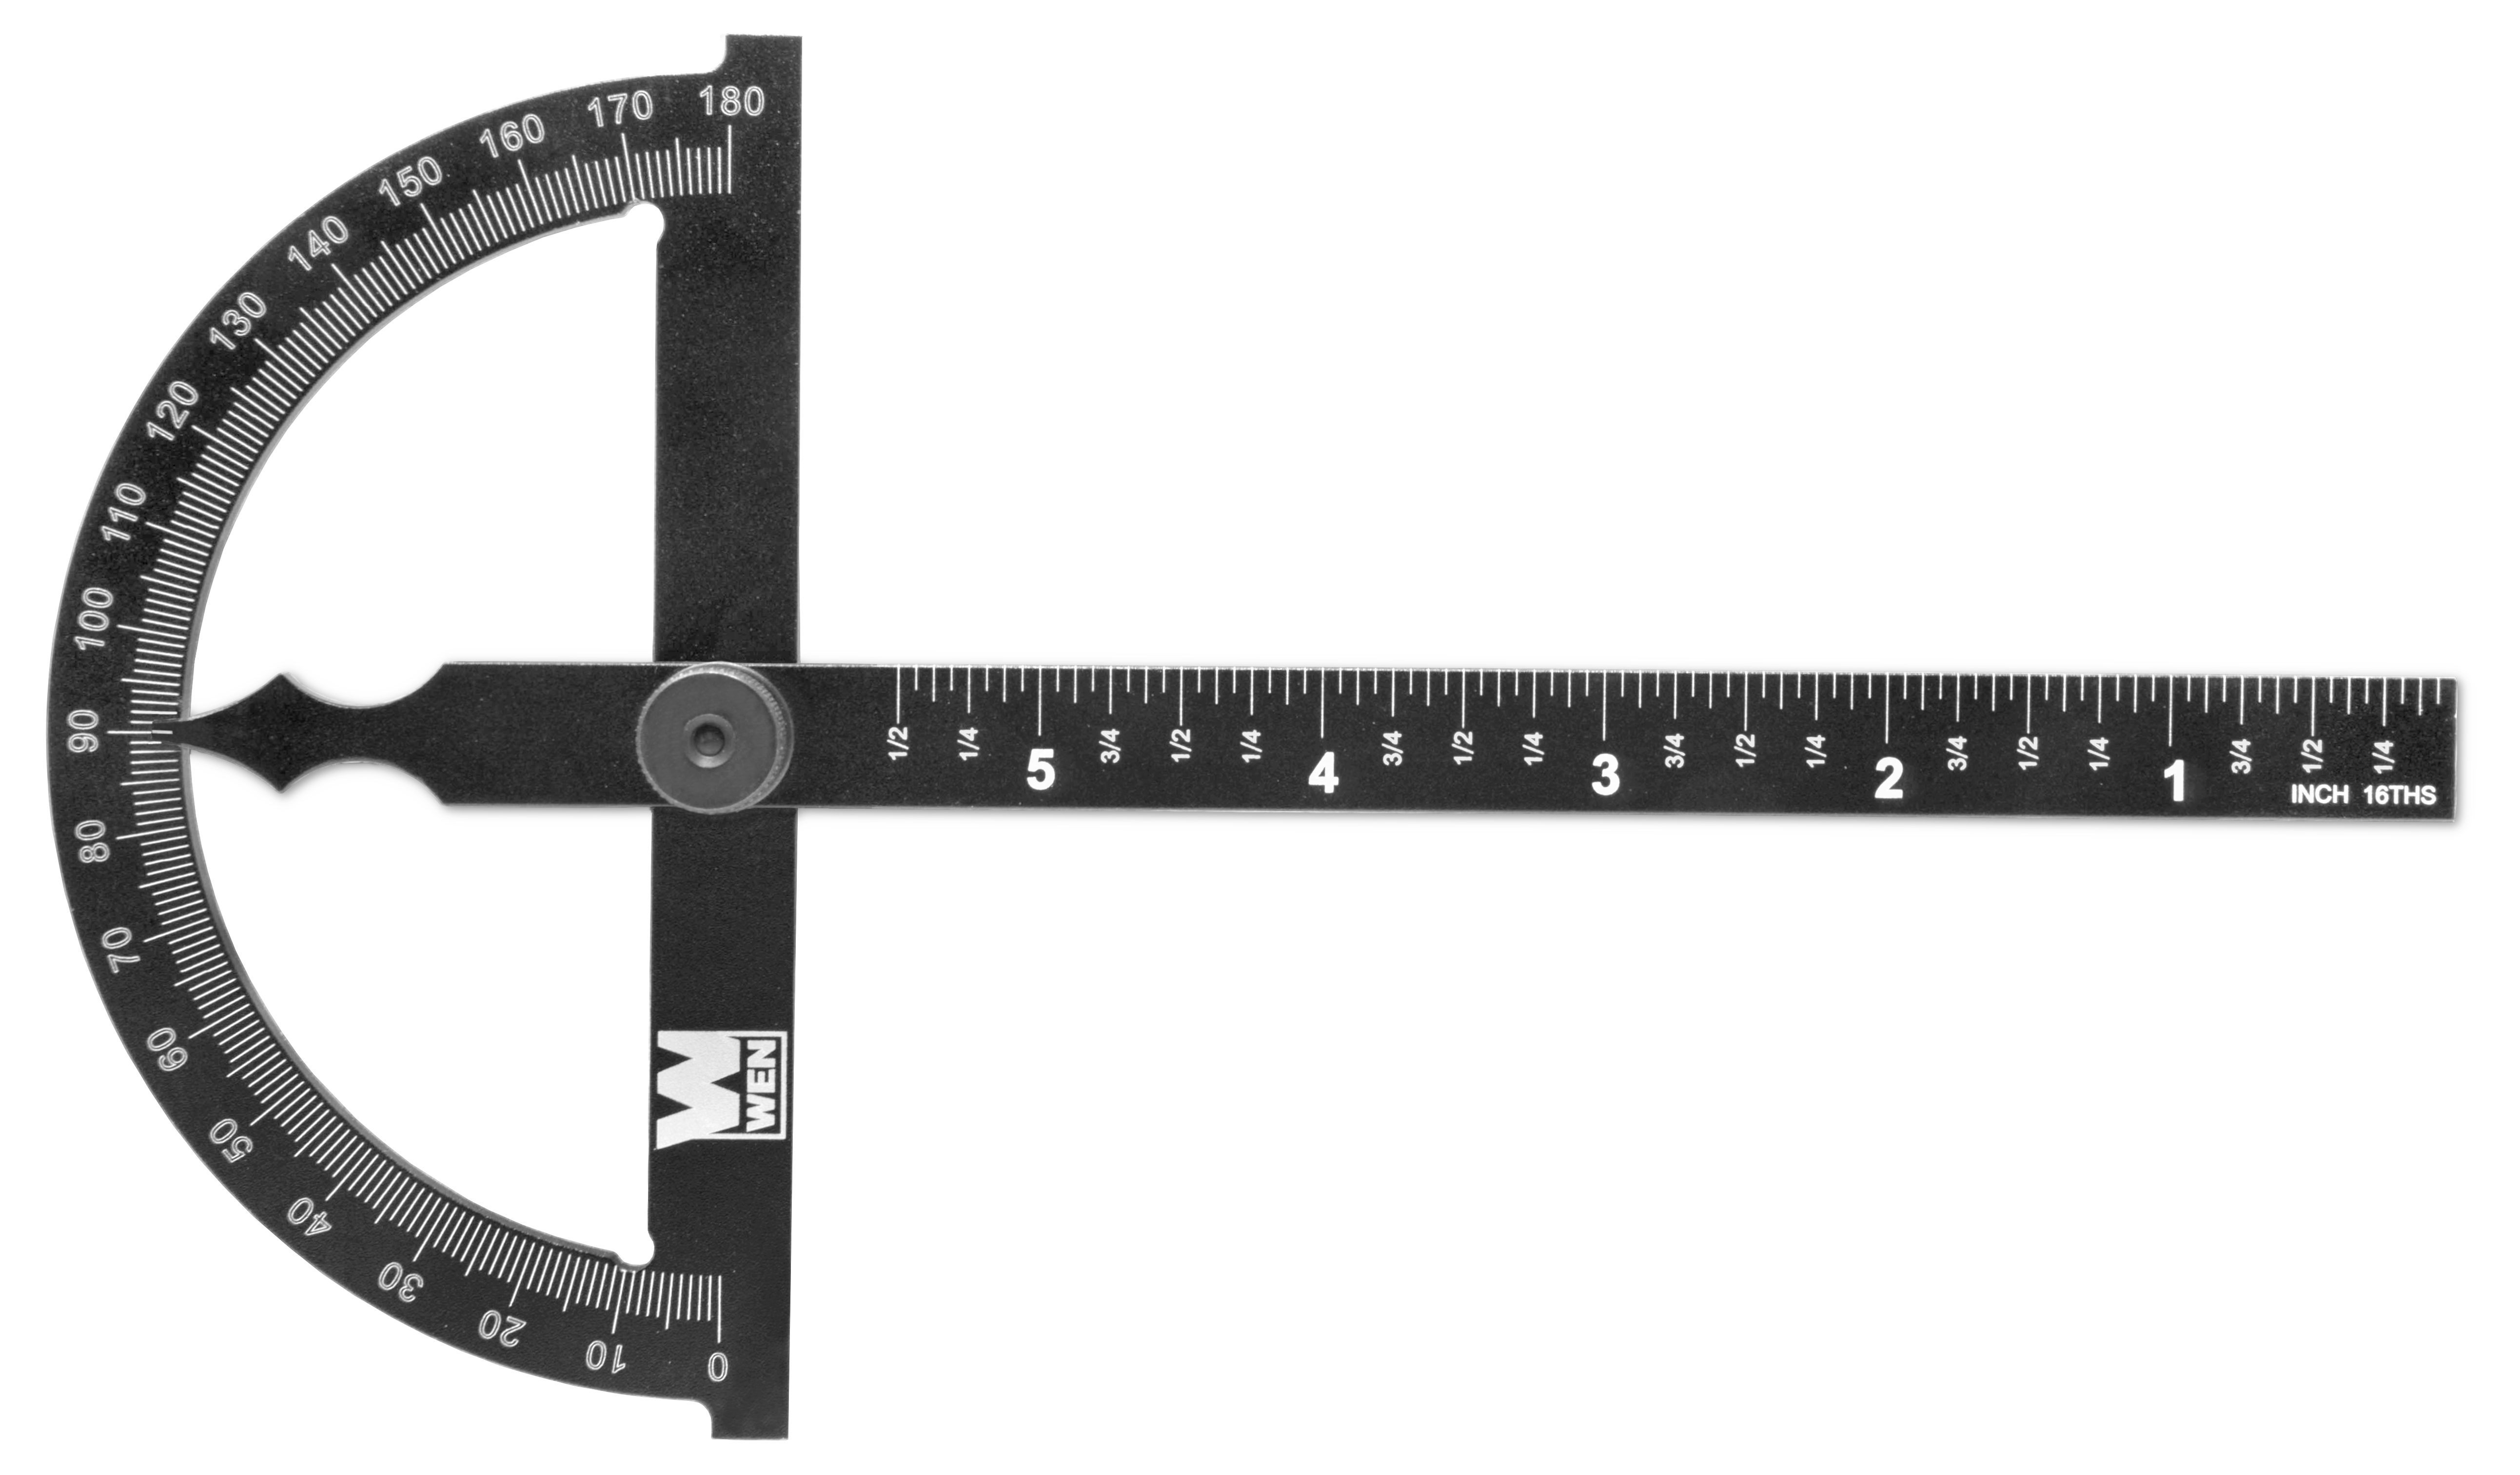 WEN Adjustable Aluminum Protractor and Angle Gauge with Laser Etched Scale - image 3 of 5